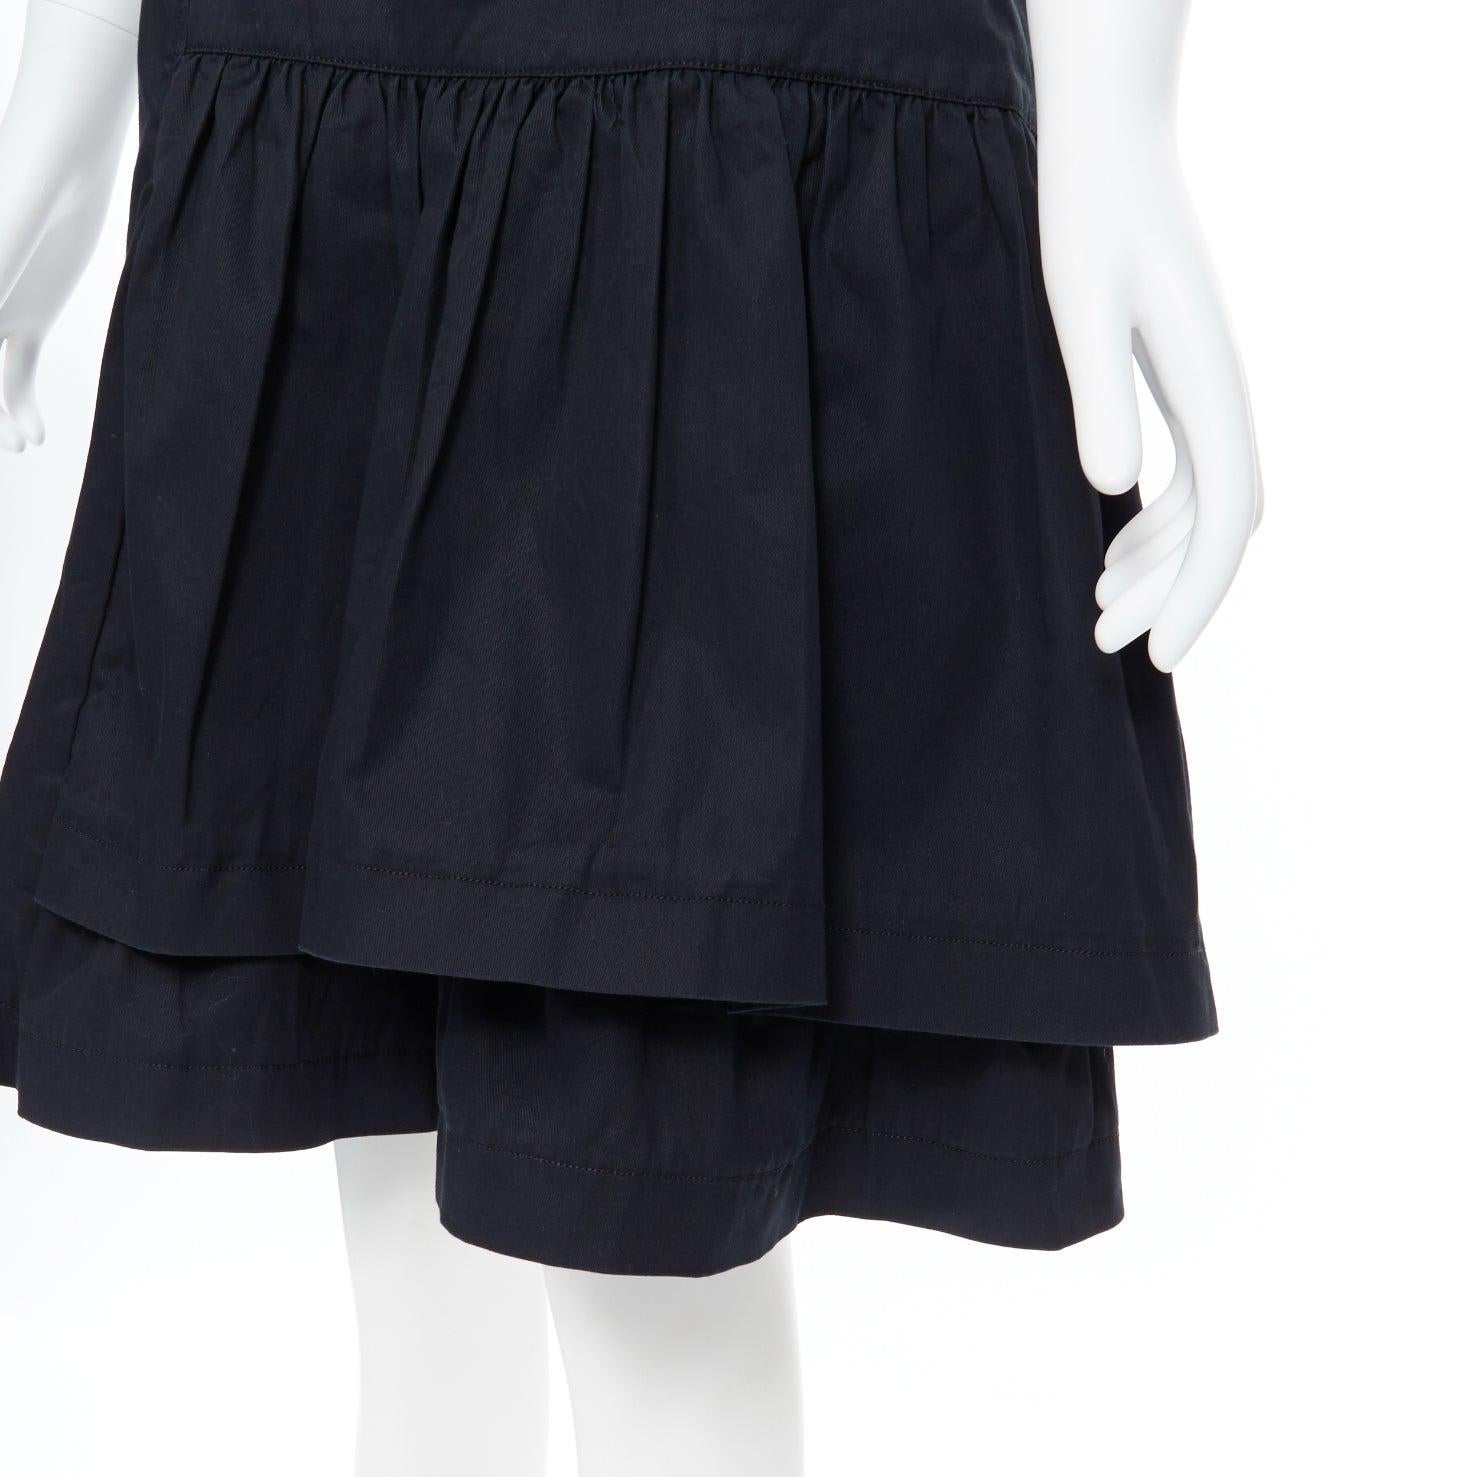 vintage MIU MIU black cotton pleated tiered flared knee skirt IT40
Reference: CEWG/A00030
Brand: Miu Miu
Designer: Miuccia Prada
Model: Flare skirt
Collection: 2008
Material: Cotton, Blend
Color: Black
Pattern: Solid
Closure: Zip
Extra Details: